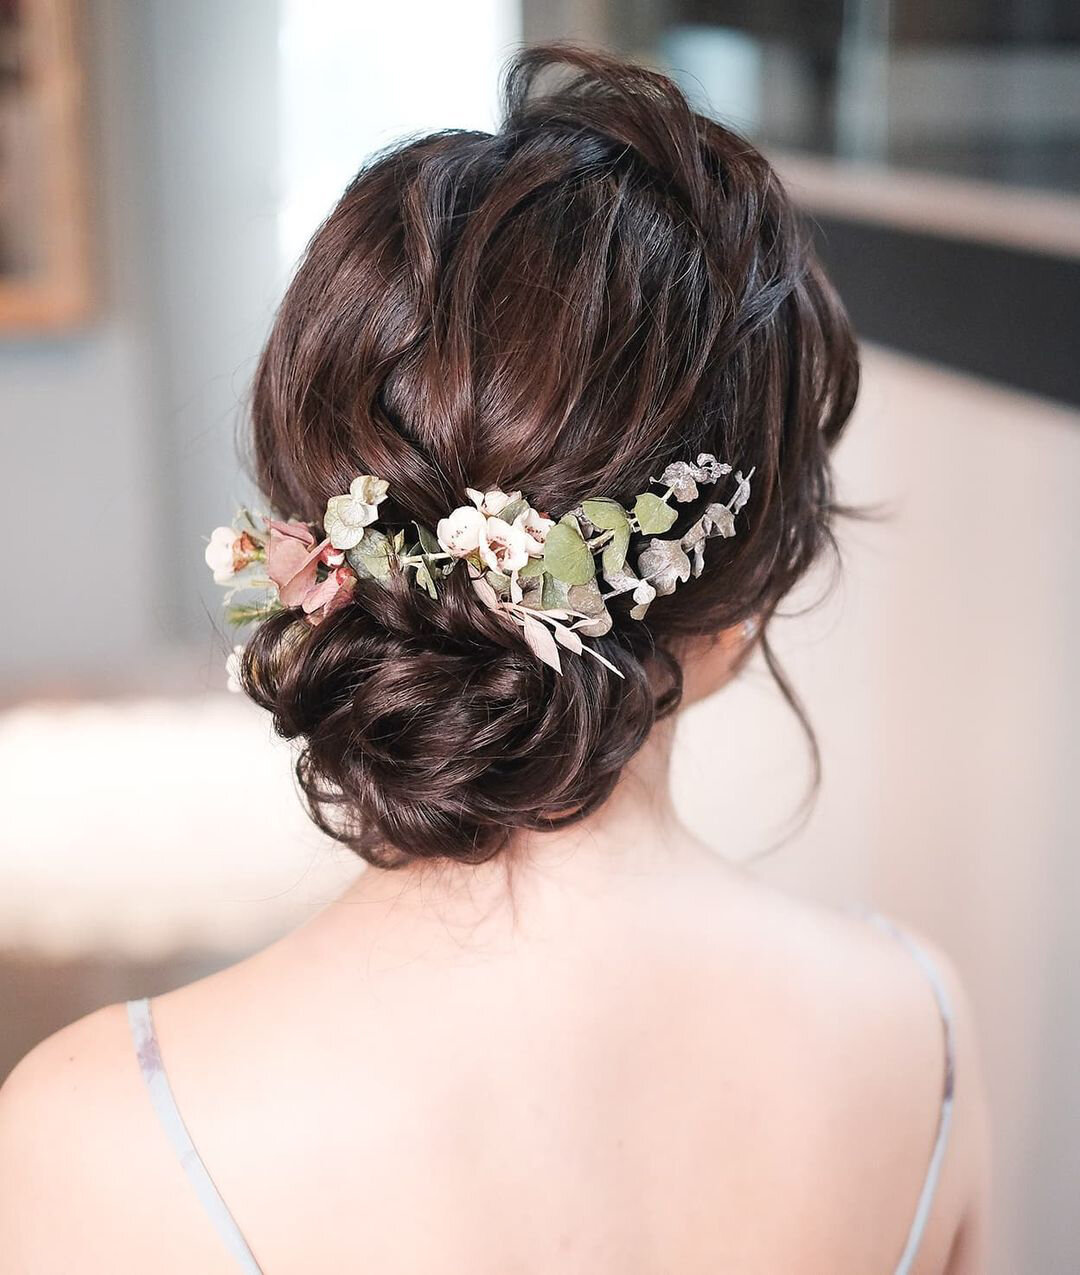 Christian Bridal Hairstyles: 15 special ideas